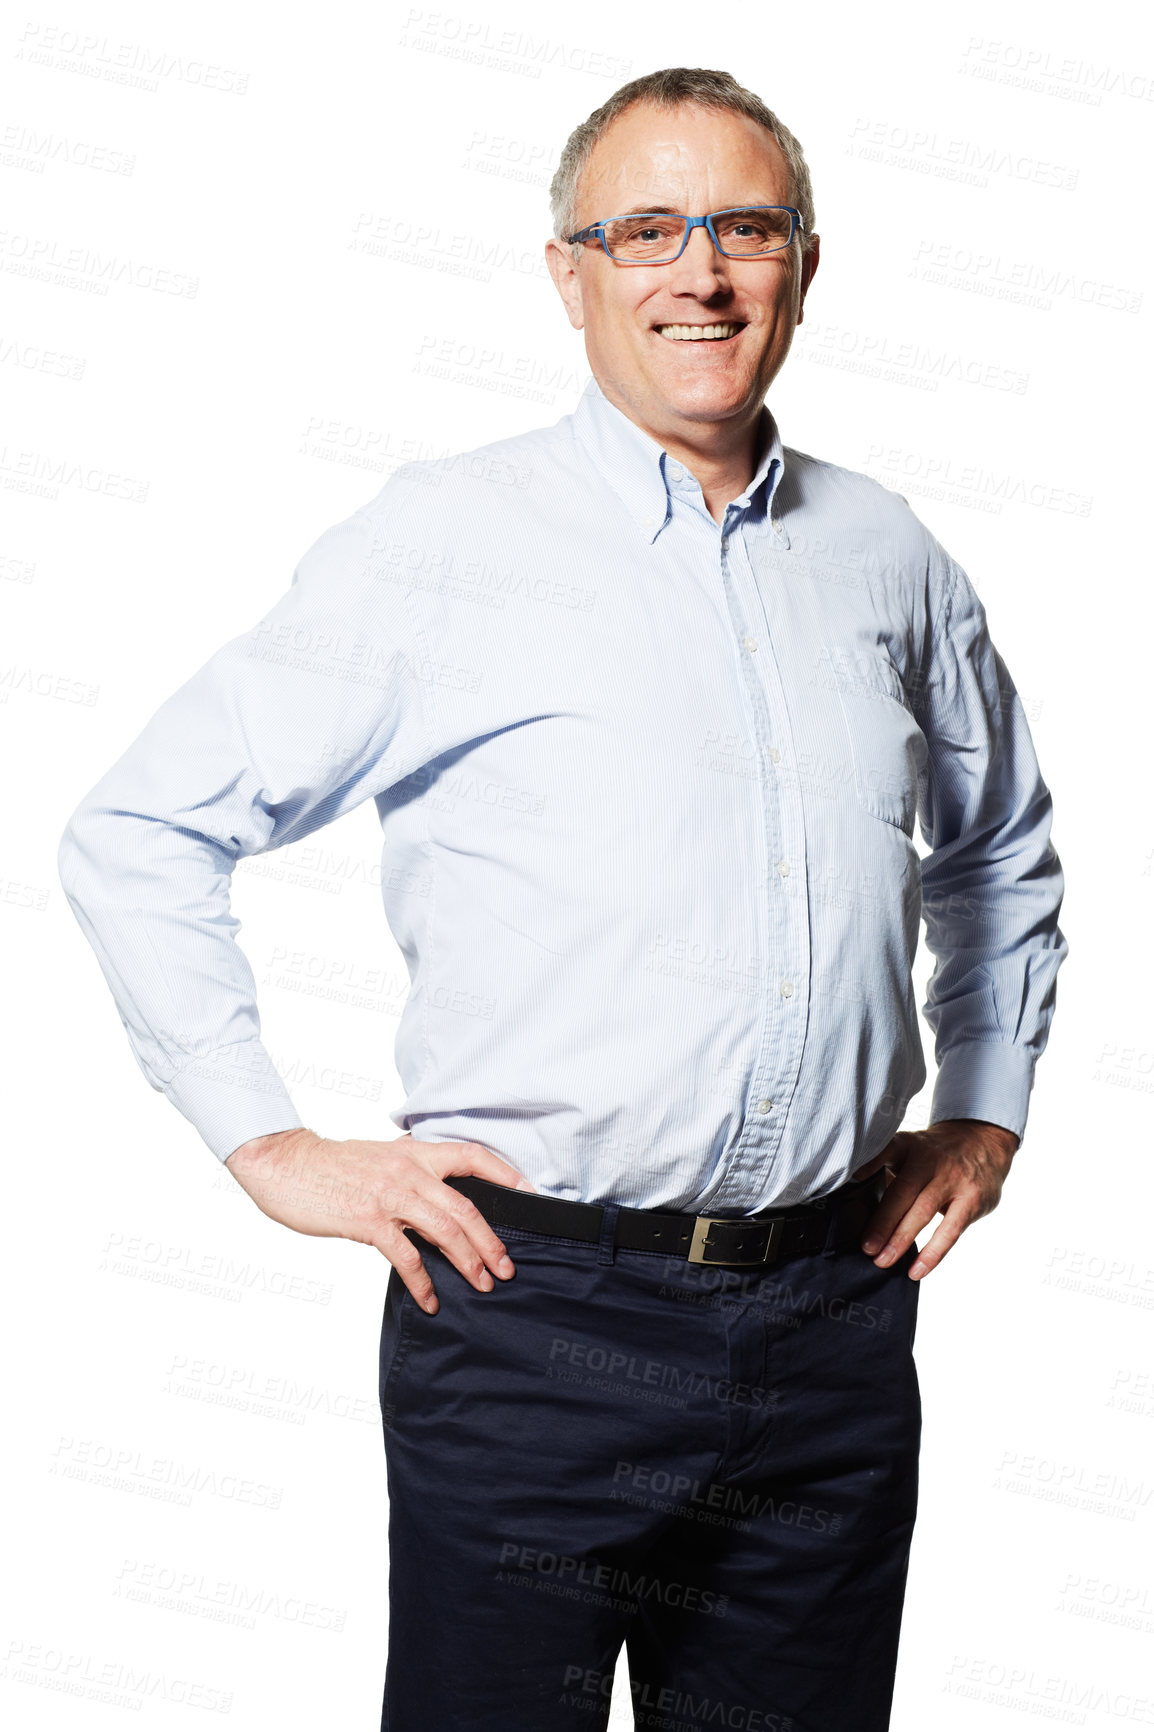 Buy stock photo Studio portrait of a mature man standing with his hands on his hips